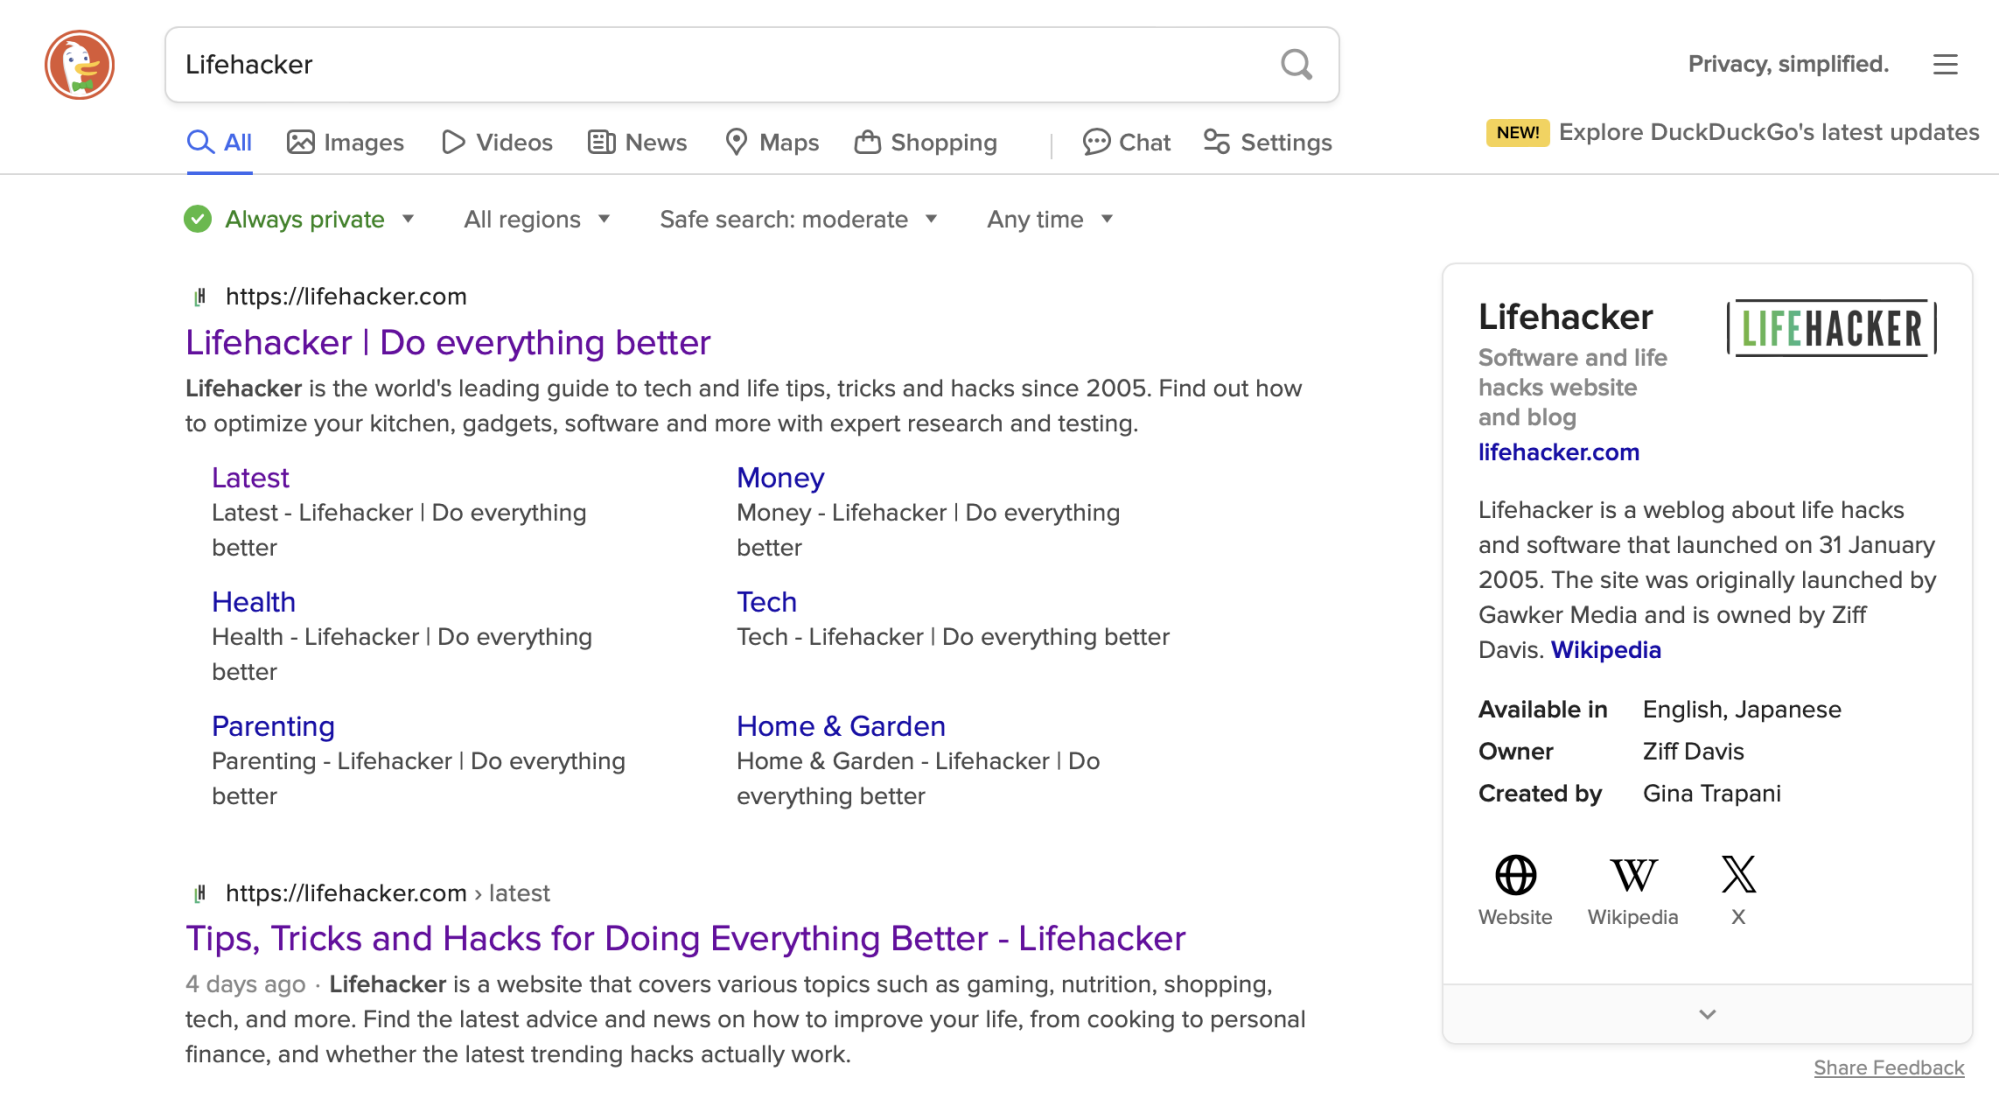 A DuckDuckGo search for the word "Lifehacker"